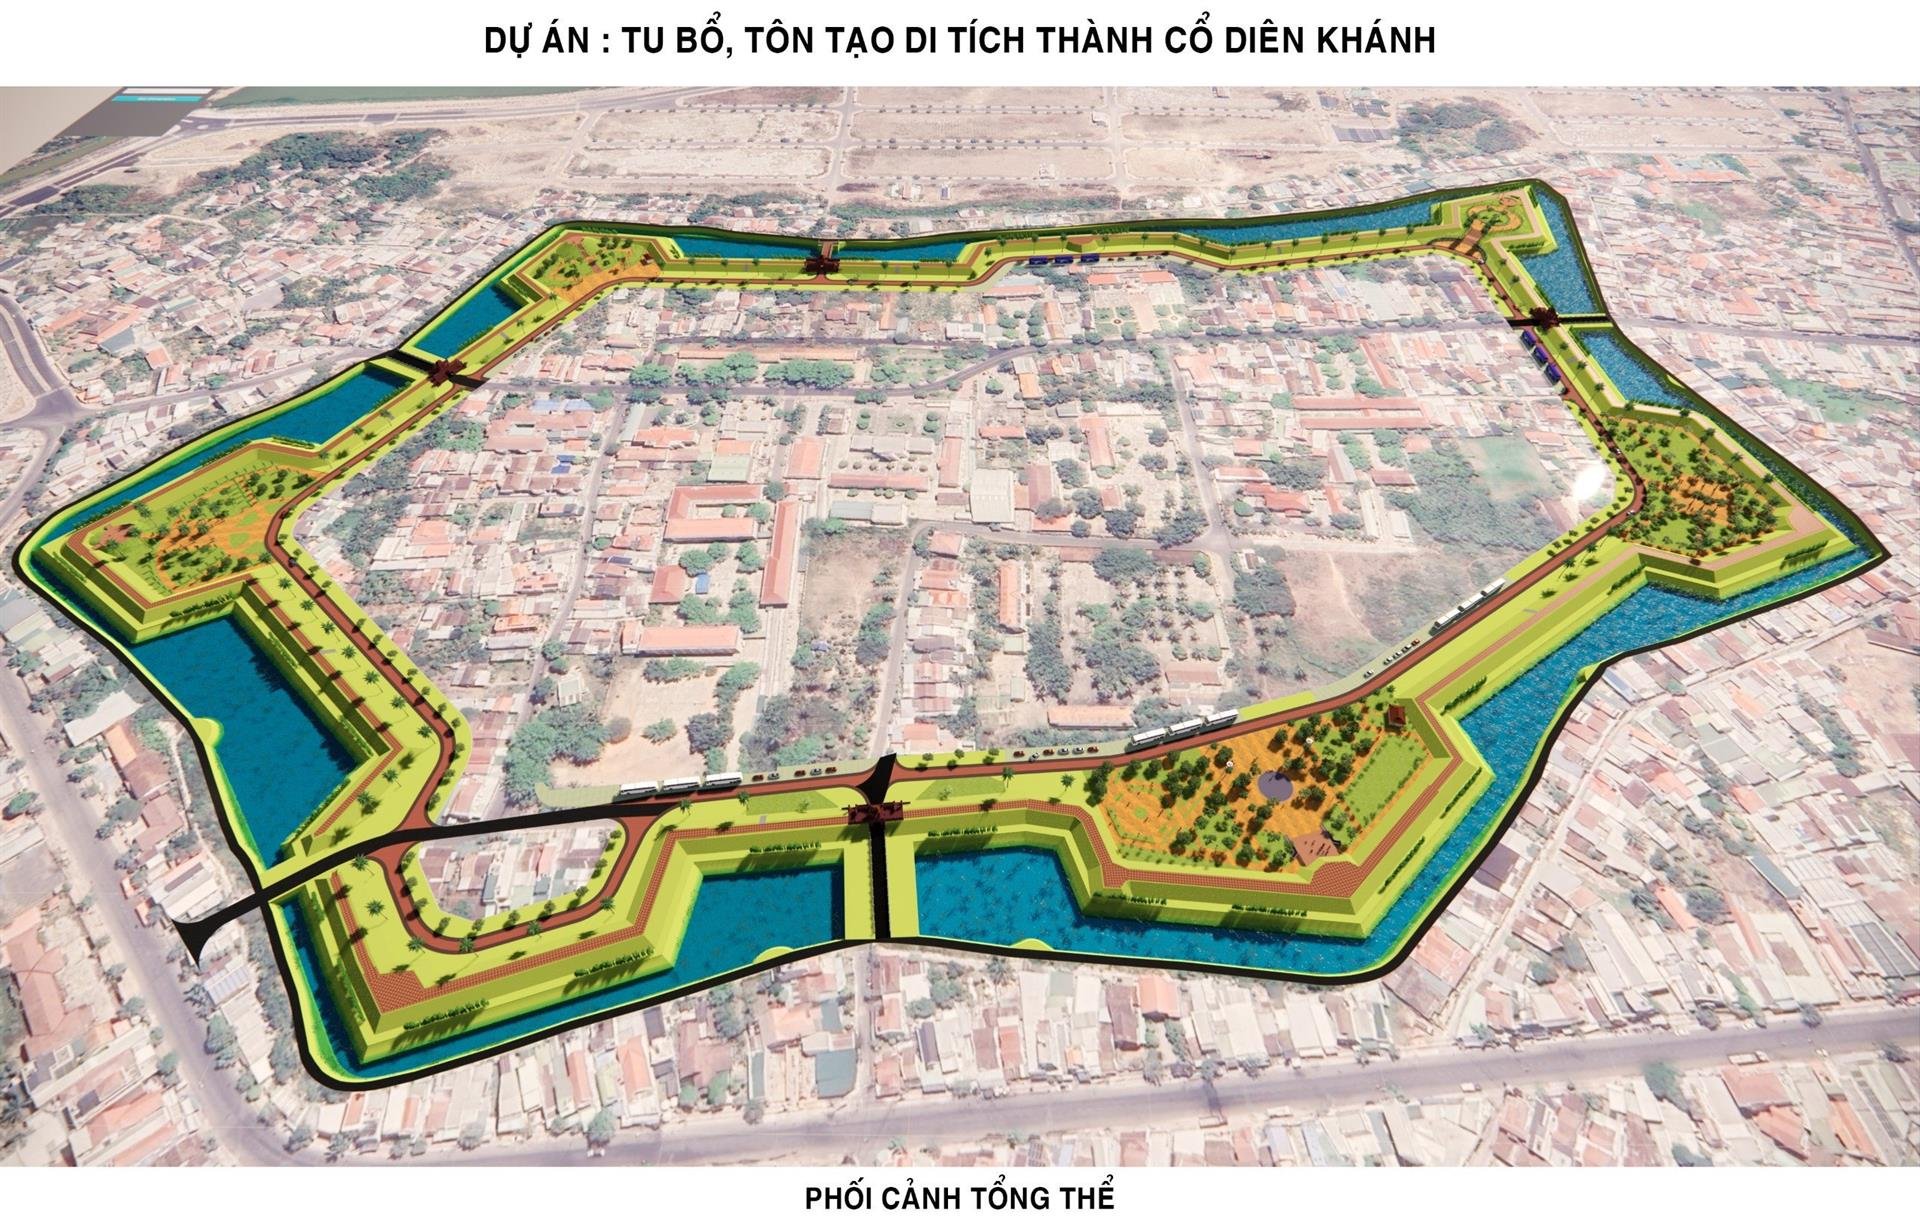 Khanh Hoa: Dien Khanh Ancient Citadel to be renovated in 4th quarter this year